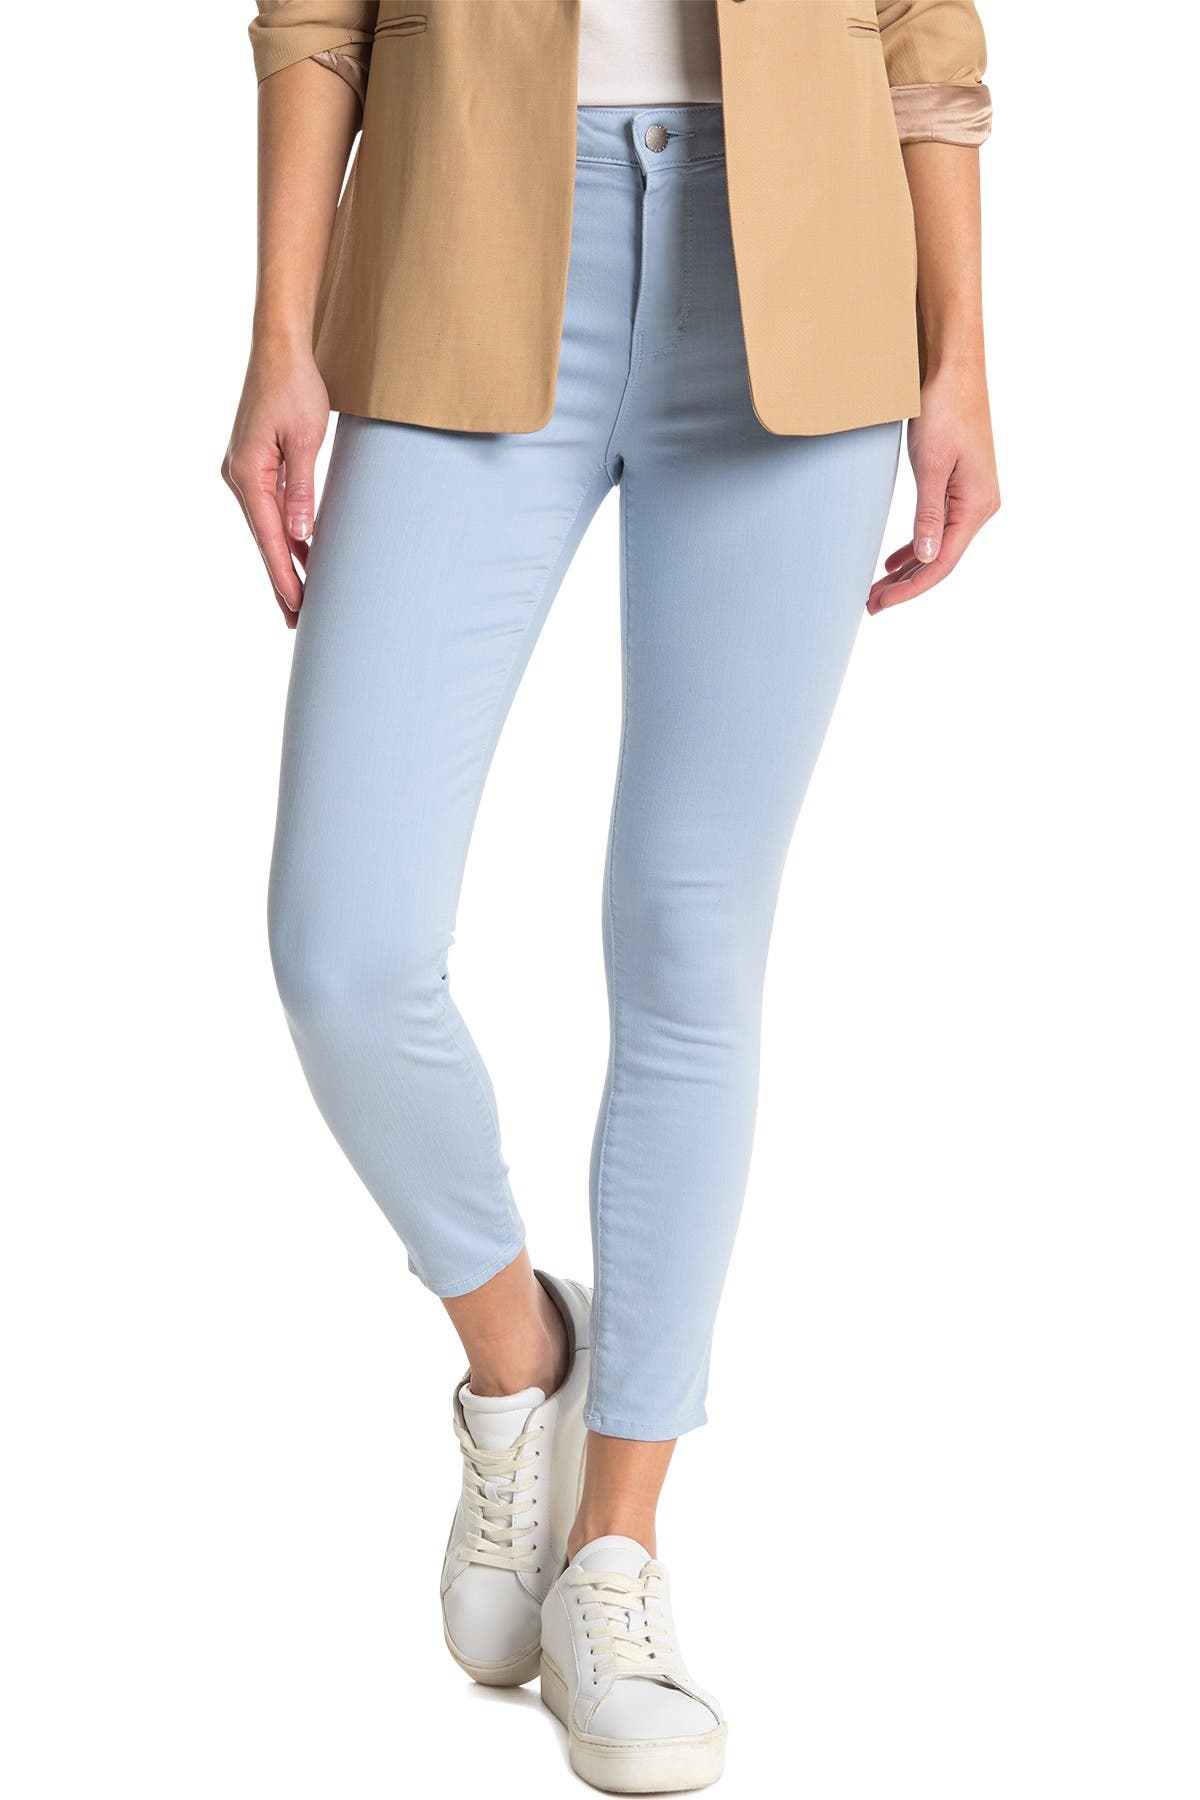 L Agence Marguerite High Waist Skinny Ankle Jeans In Light/pastel Blue2